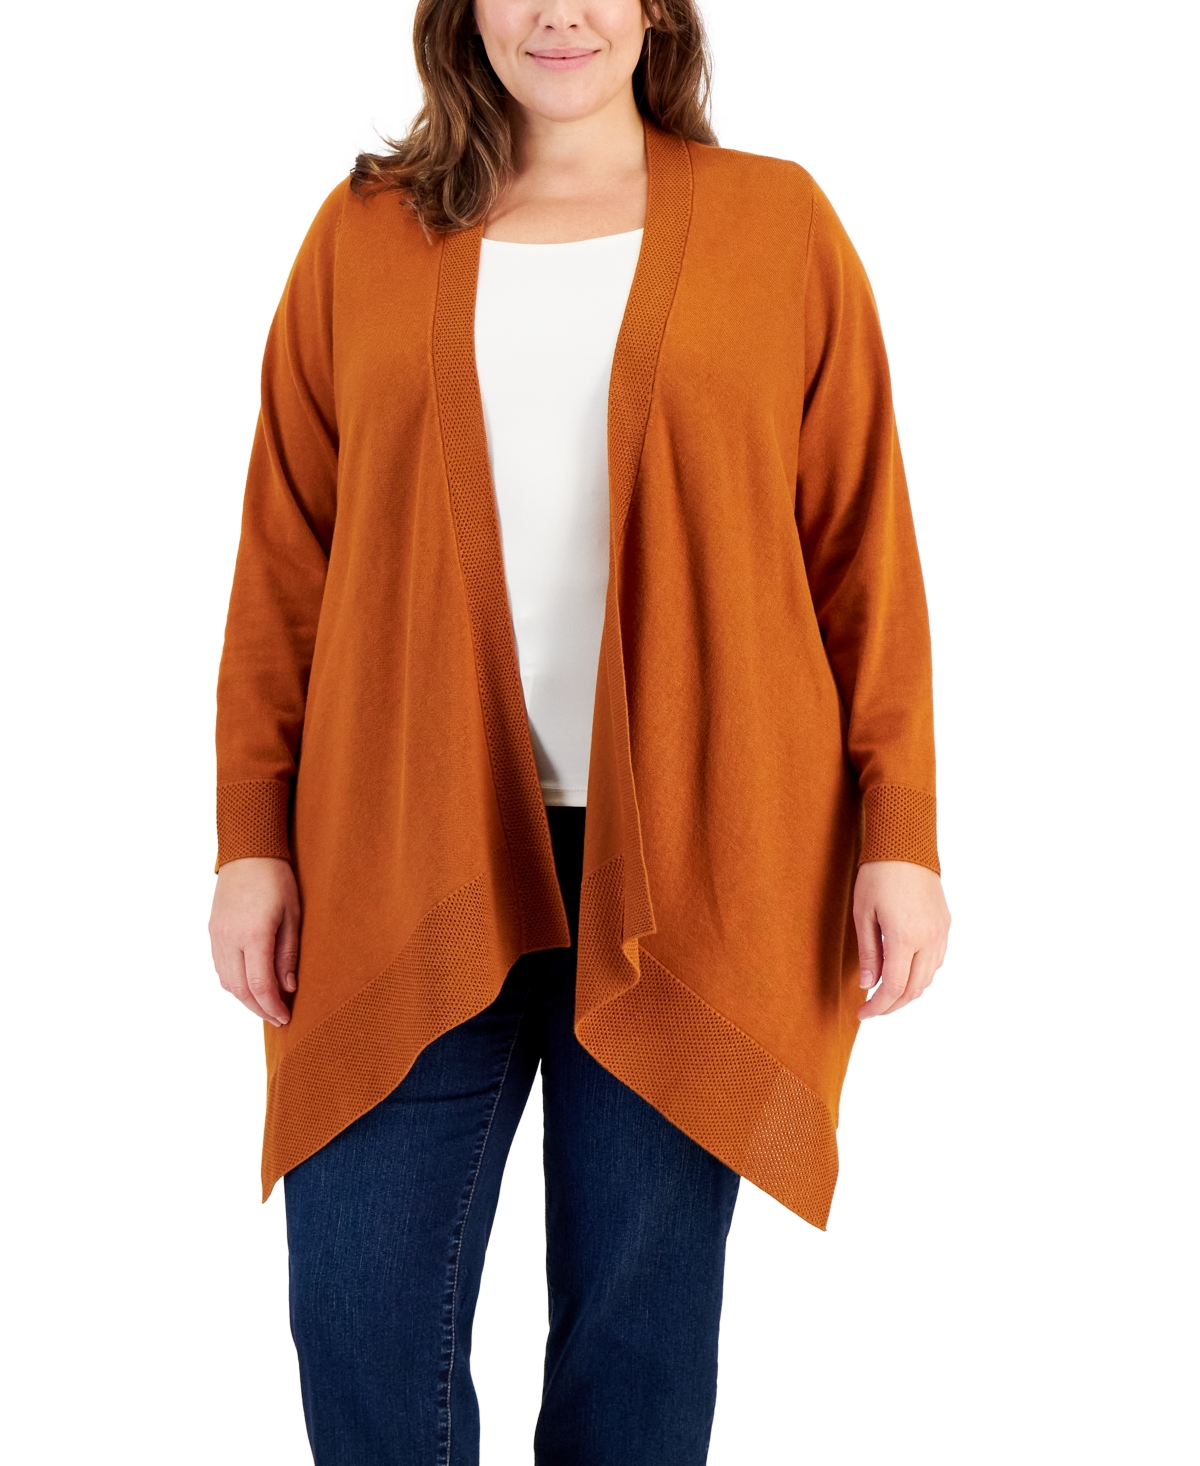 Jm Collection Plus Size Open-Front Cardigan, Created for Macy's